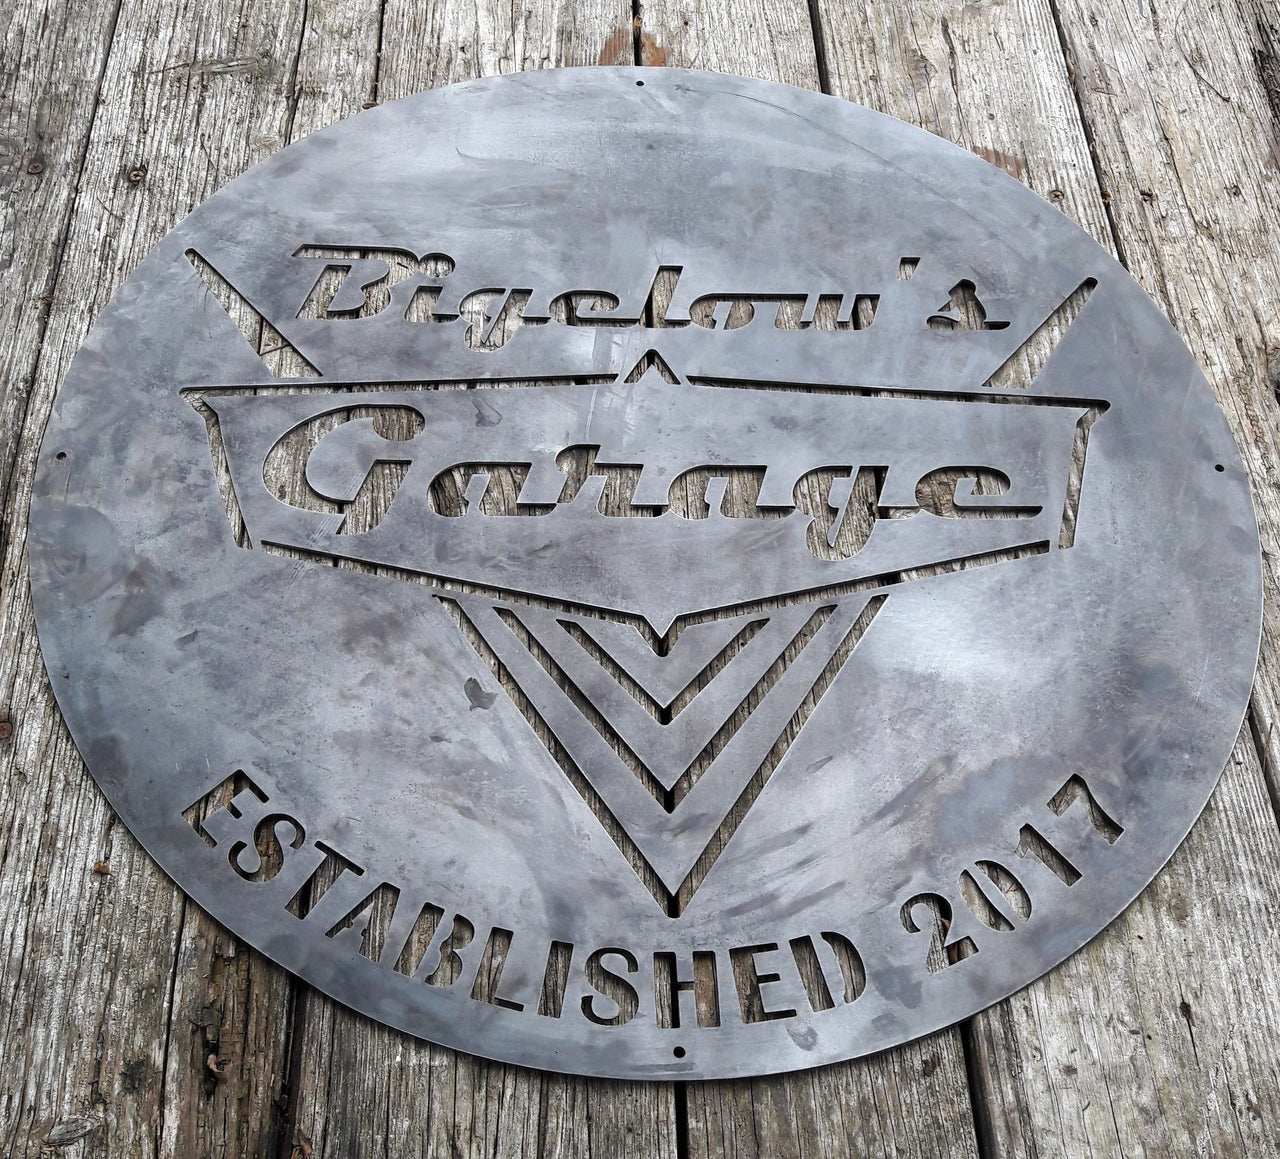 This is a rustic round metal garage sign which reads, "Bigelow's Garage, Established 2017"